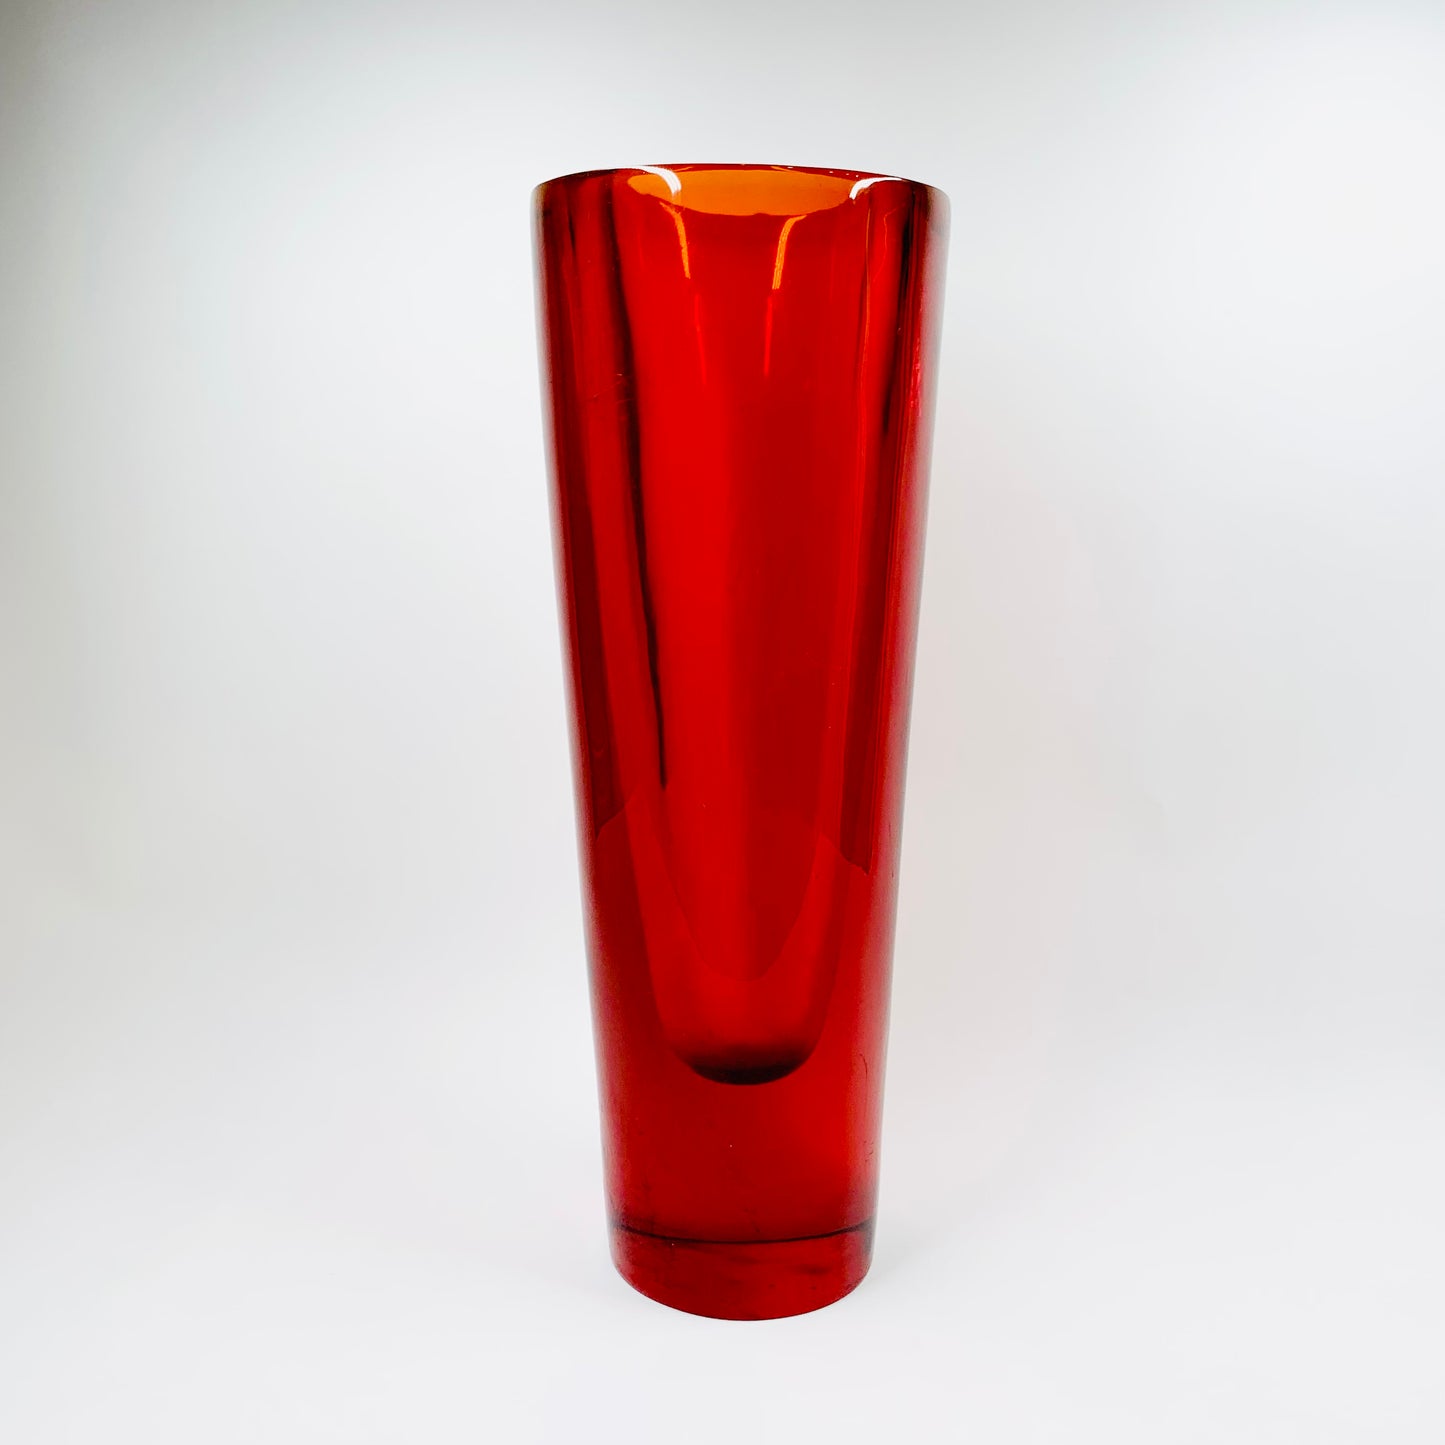 Space Age tall and heavy red resin vase